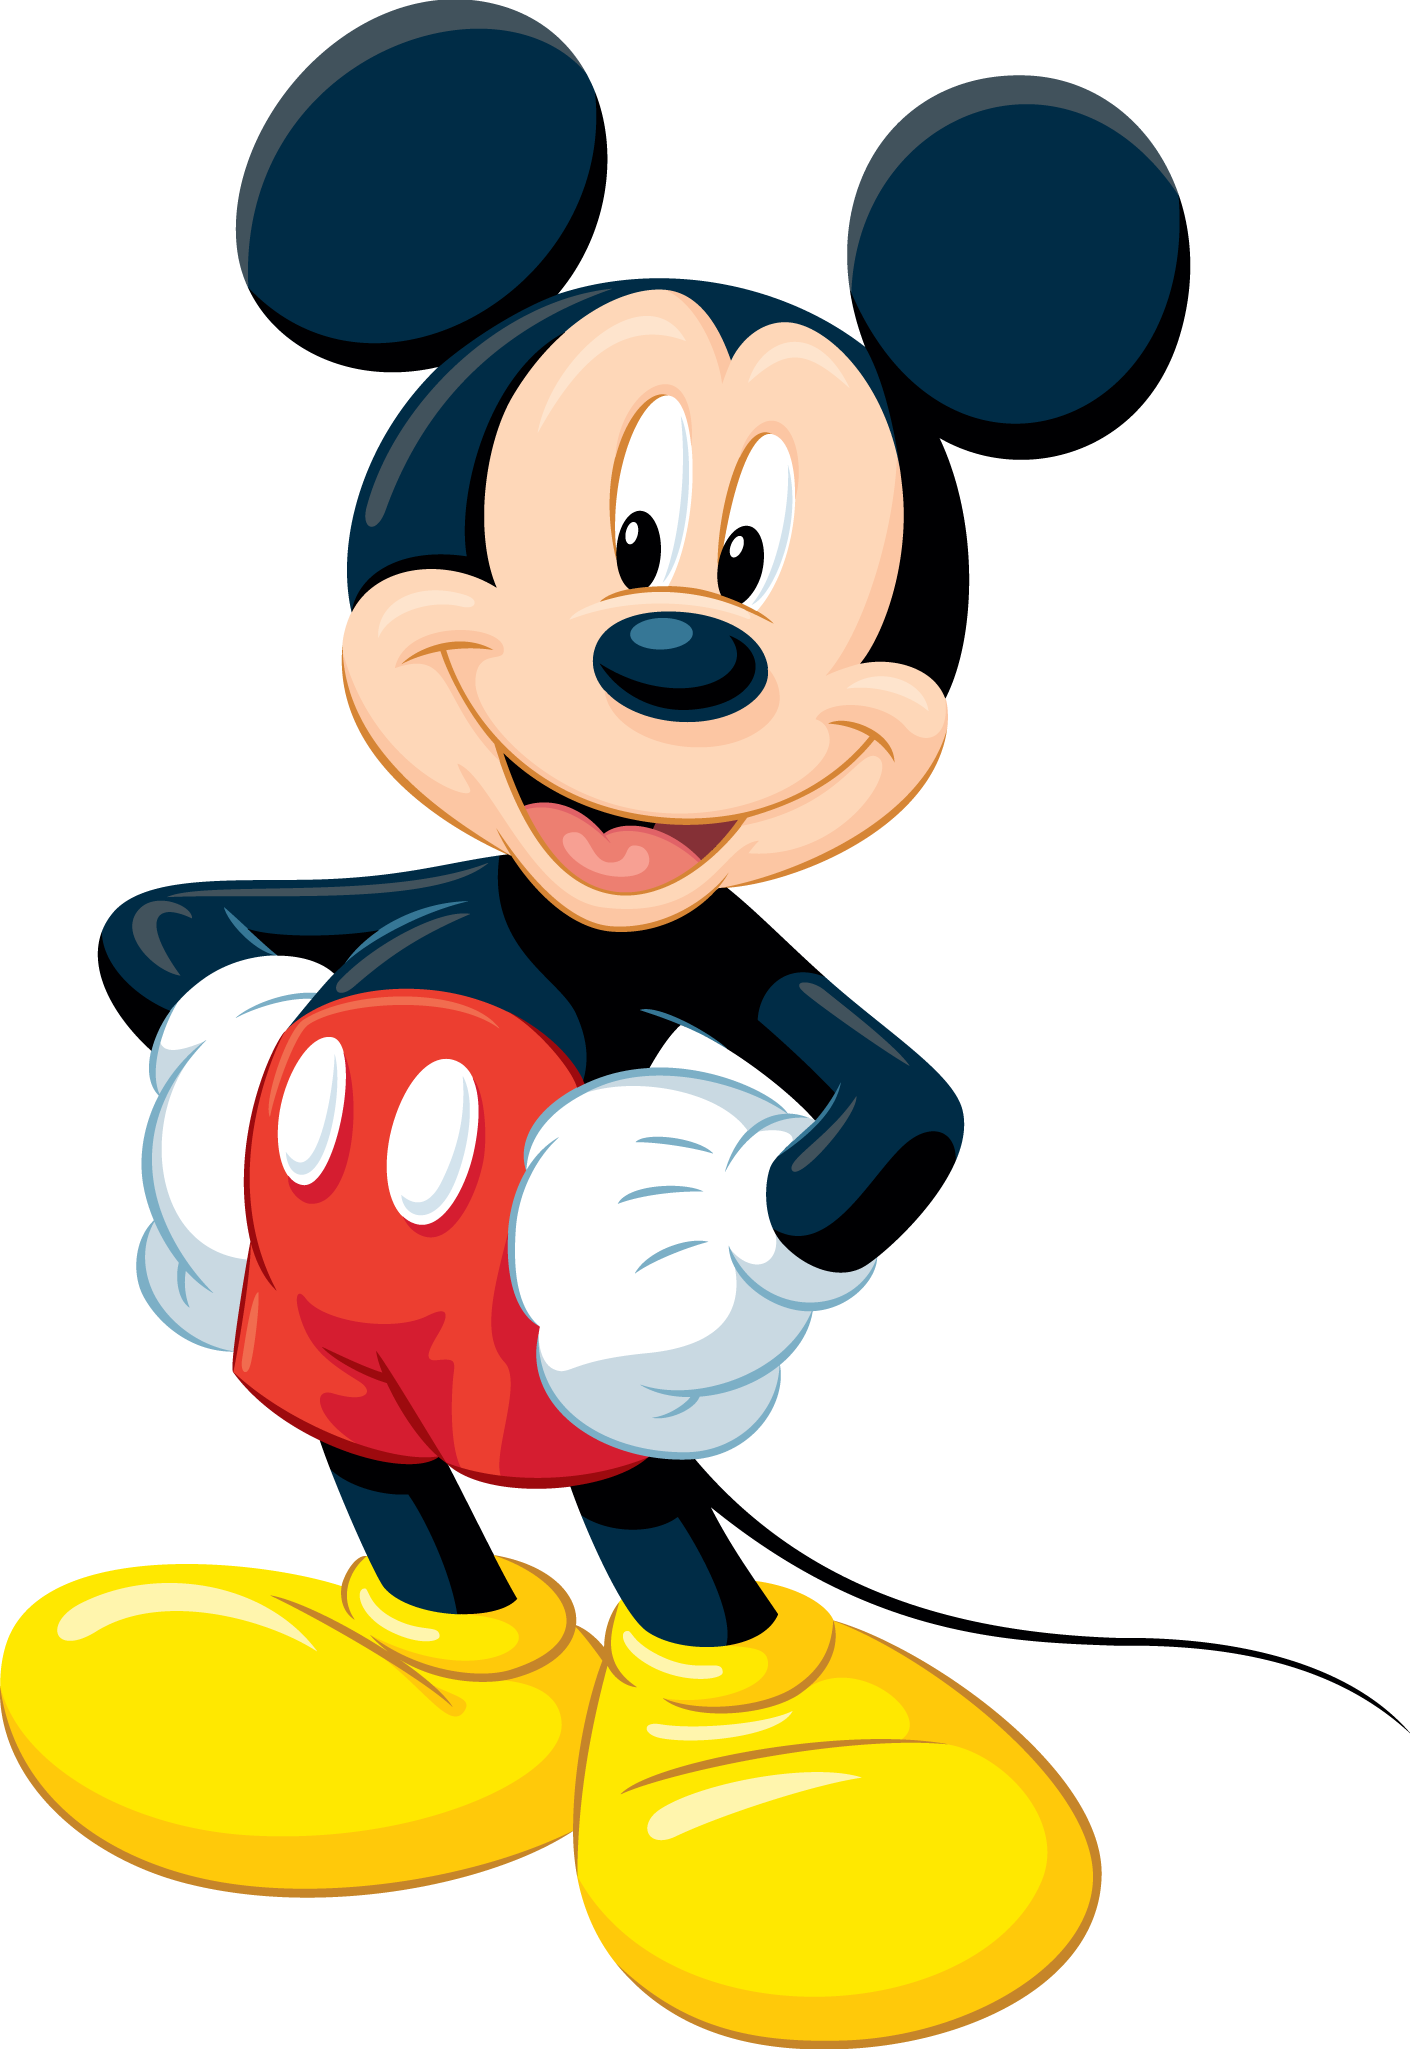 Mickey Mouse Wallpaper for iPad Air 2